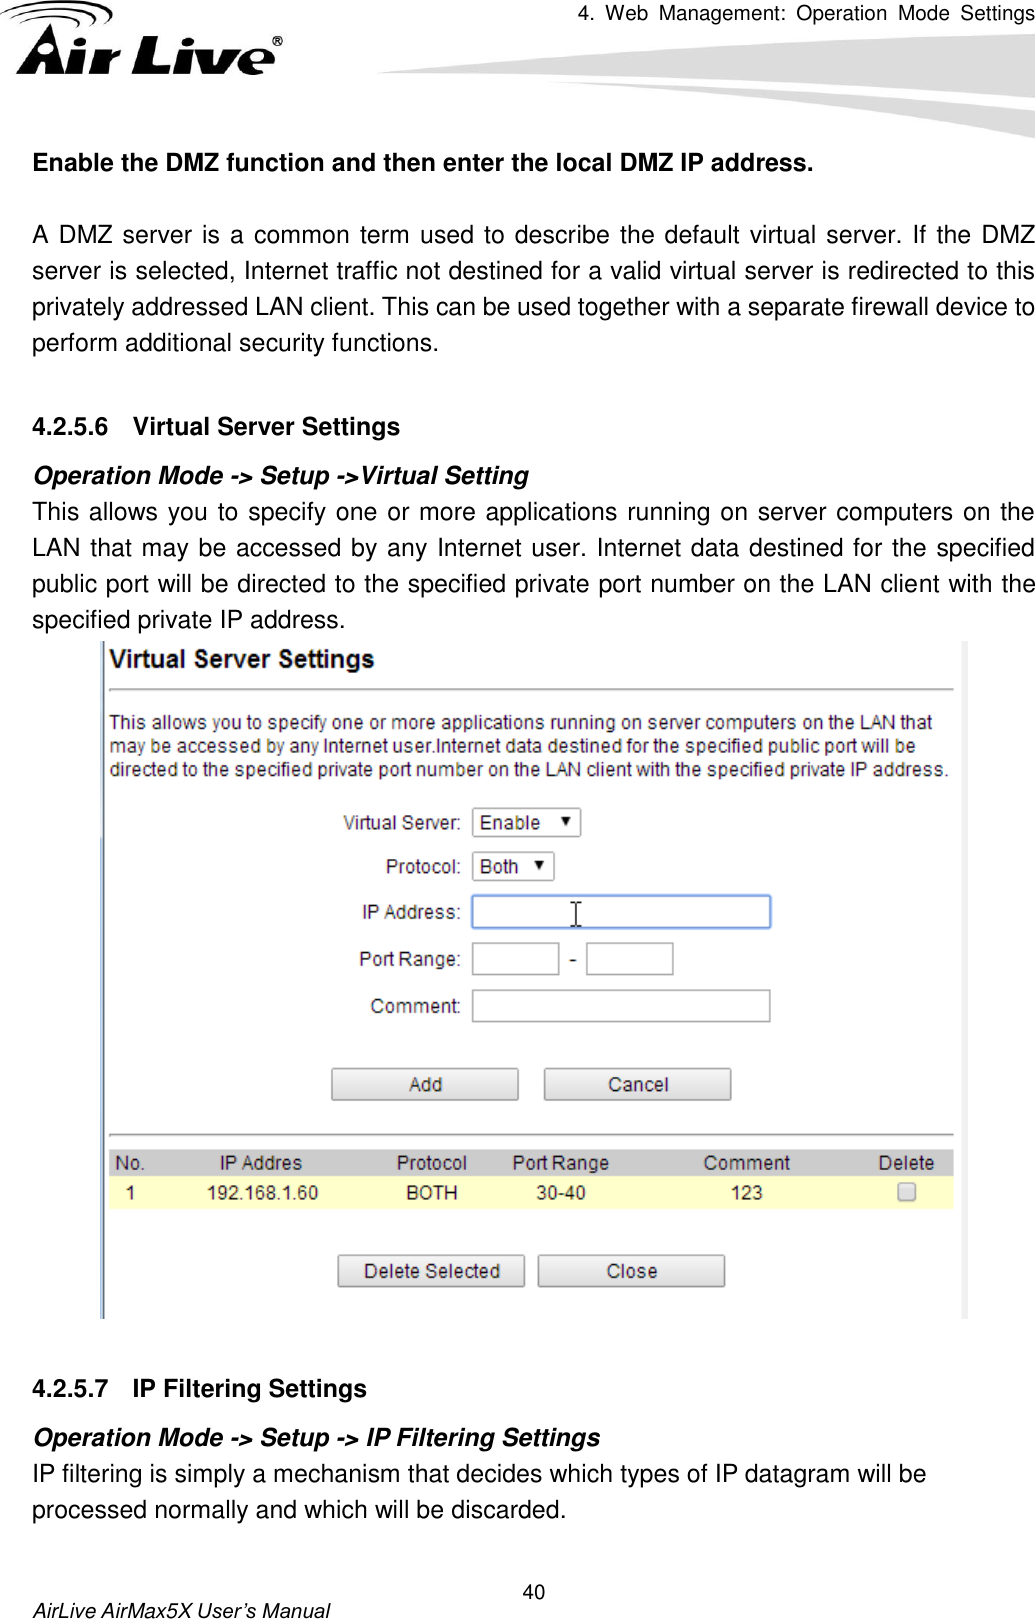 4.  Web  Management:  Operation  Mode  Settings   AirLive AirMax5X User’s Manual 40 Enable the DMZ function and then enter the local DMZ IP address.  A DMZ server is a common term used to describe the default virtual server. If the DMZ server is selected, Internet traffic not destined for a valid virtual server is redirected to this privately addressed LAN client. This can be used together with a separate firewall device to perform additional security functions.  4.2.5.6  Virtual Server Settings Operation Mode -&gt; Setup -&gt;Virtual Setting This allows you to specify one or more applications running on server computers on the LAN that may be accessed by any Internet user. Internet data destined for the specified public port will be directed to the specified private port number on the LAN client with the specified private IP address.     4.2.5.7  IP Filtering Settings Operation Mode -&gt; Setup -&gt; IP Filtering Settings IP filtering is simply a mechanism that decides which types of IP datagram will be processed normally and which will be discarded.    